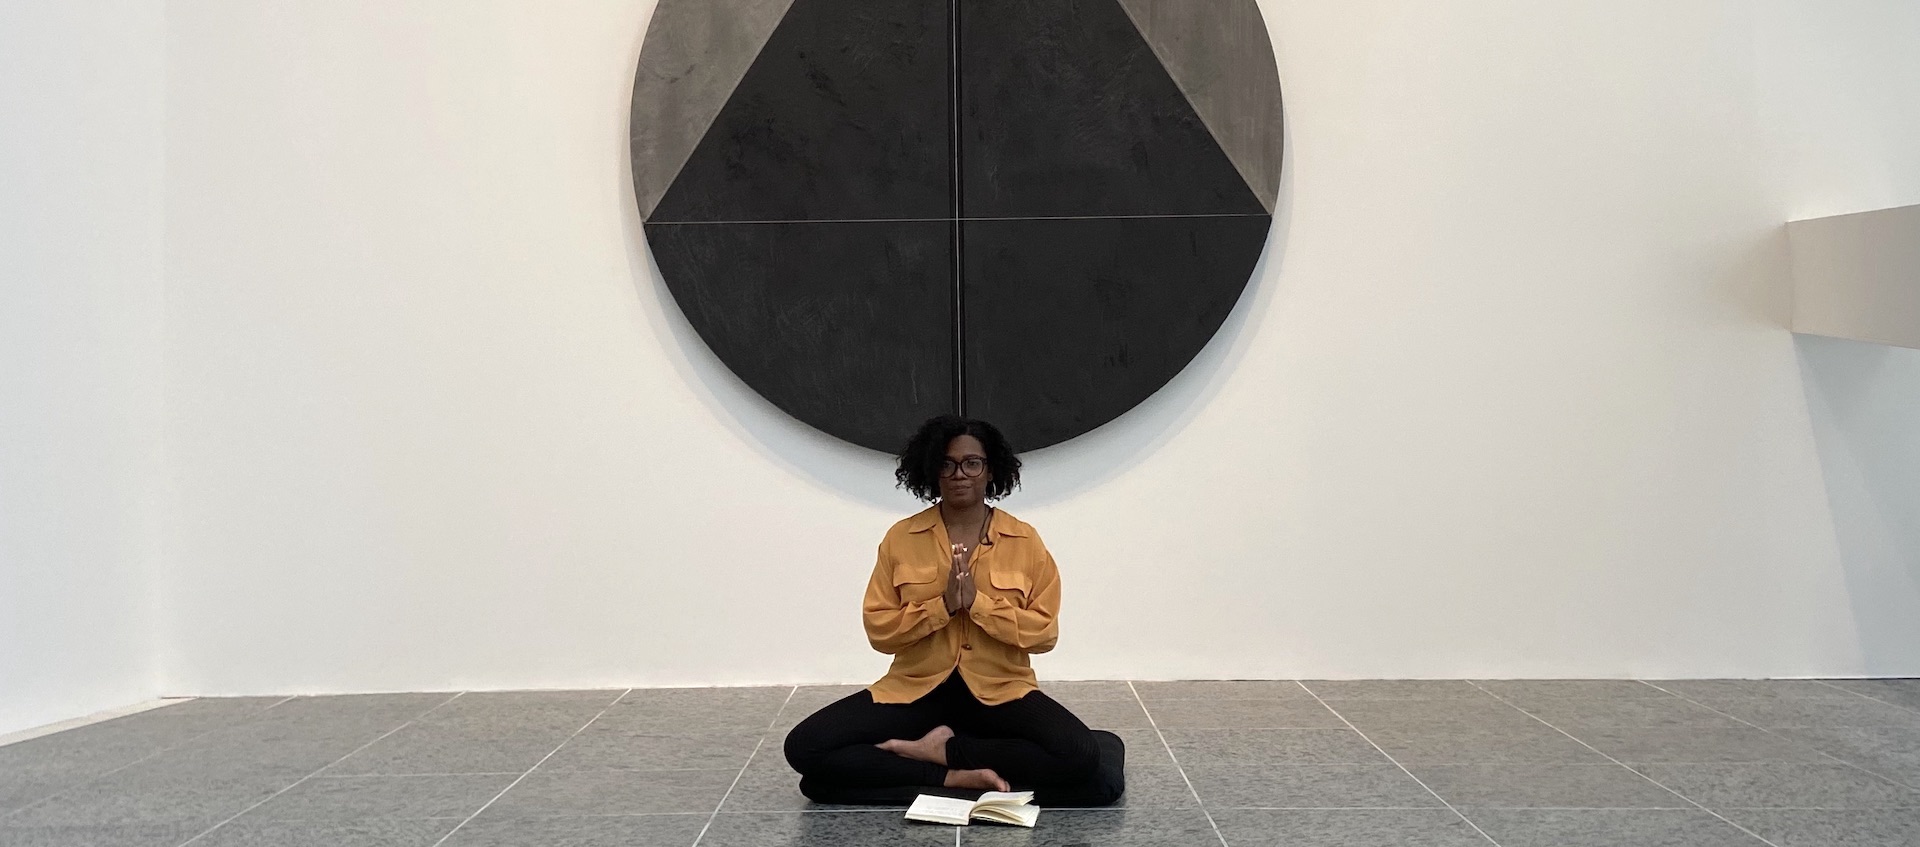 Monique McCrystal sits on the tile floor of the Wexner Center for the Arts galleries with her hands in prayer pose, underneath a round abstract painting in black and gray by Torkwase Dyson